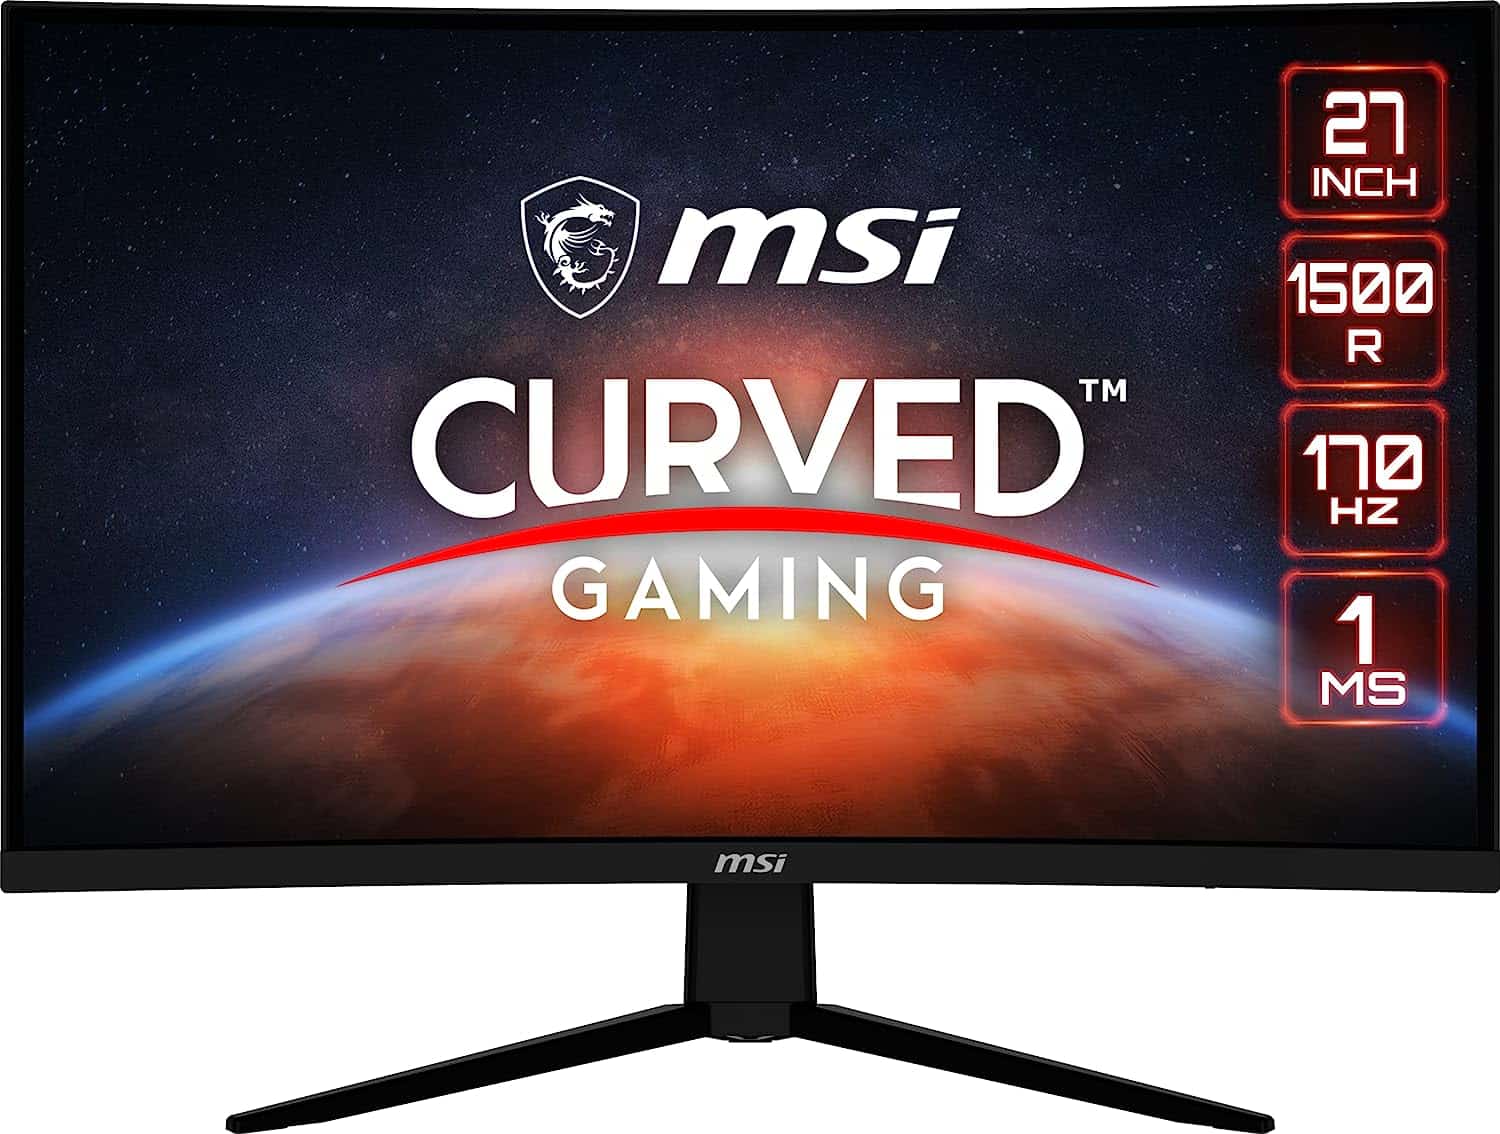 MSI Cuts Through the BS With 4K 144Hz Gaming Monitor and True HDMI 2.1